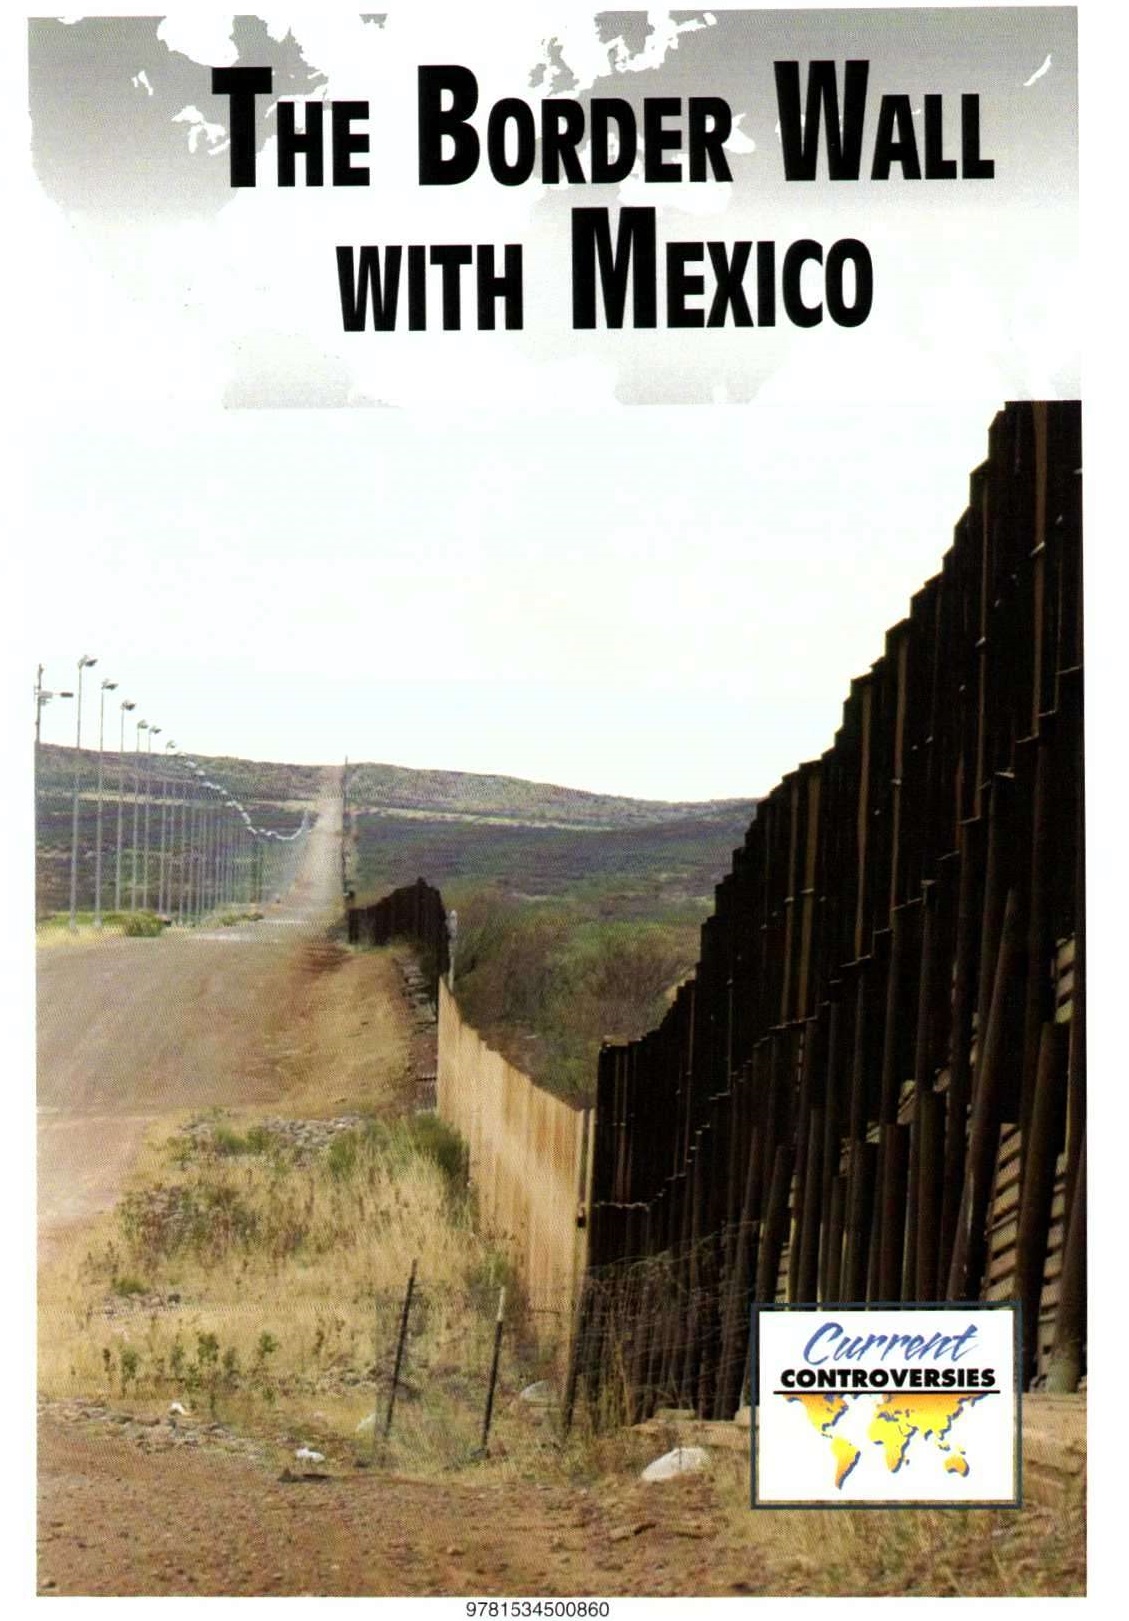 The border wall with Mexico